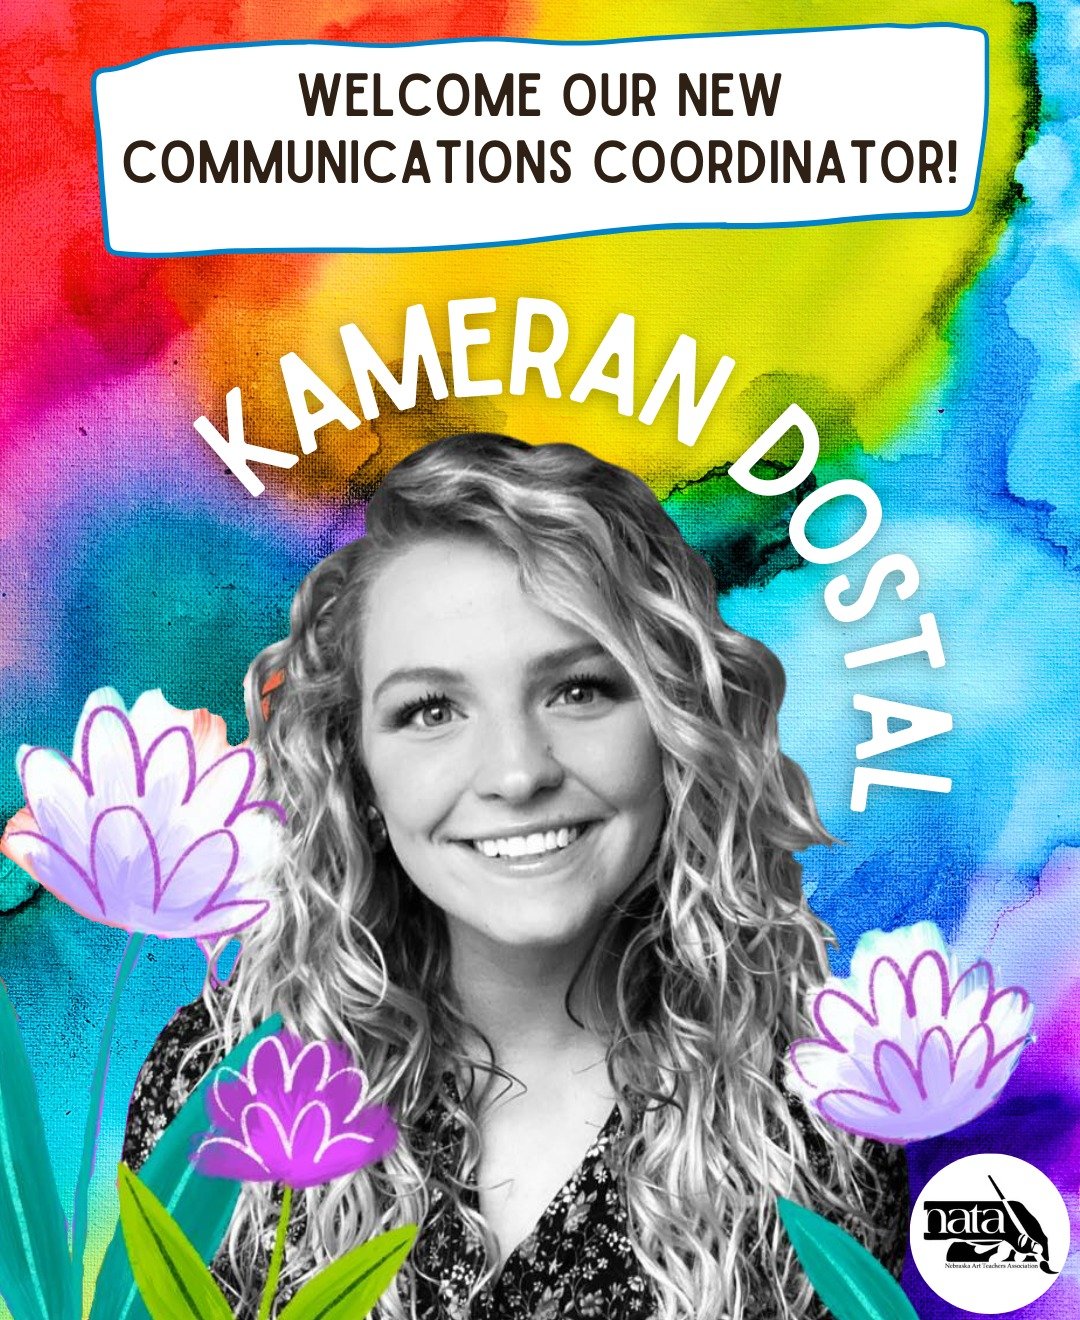 NATA is thrilled to welcome Kameran Dostal of Kearney to her new role as NATA Communications Coordinator. Kameran will continue serving in her role as NATA Community Director as well. 

The communications coordinator works closely with the president 